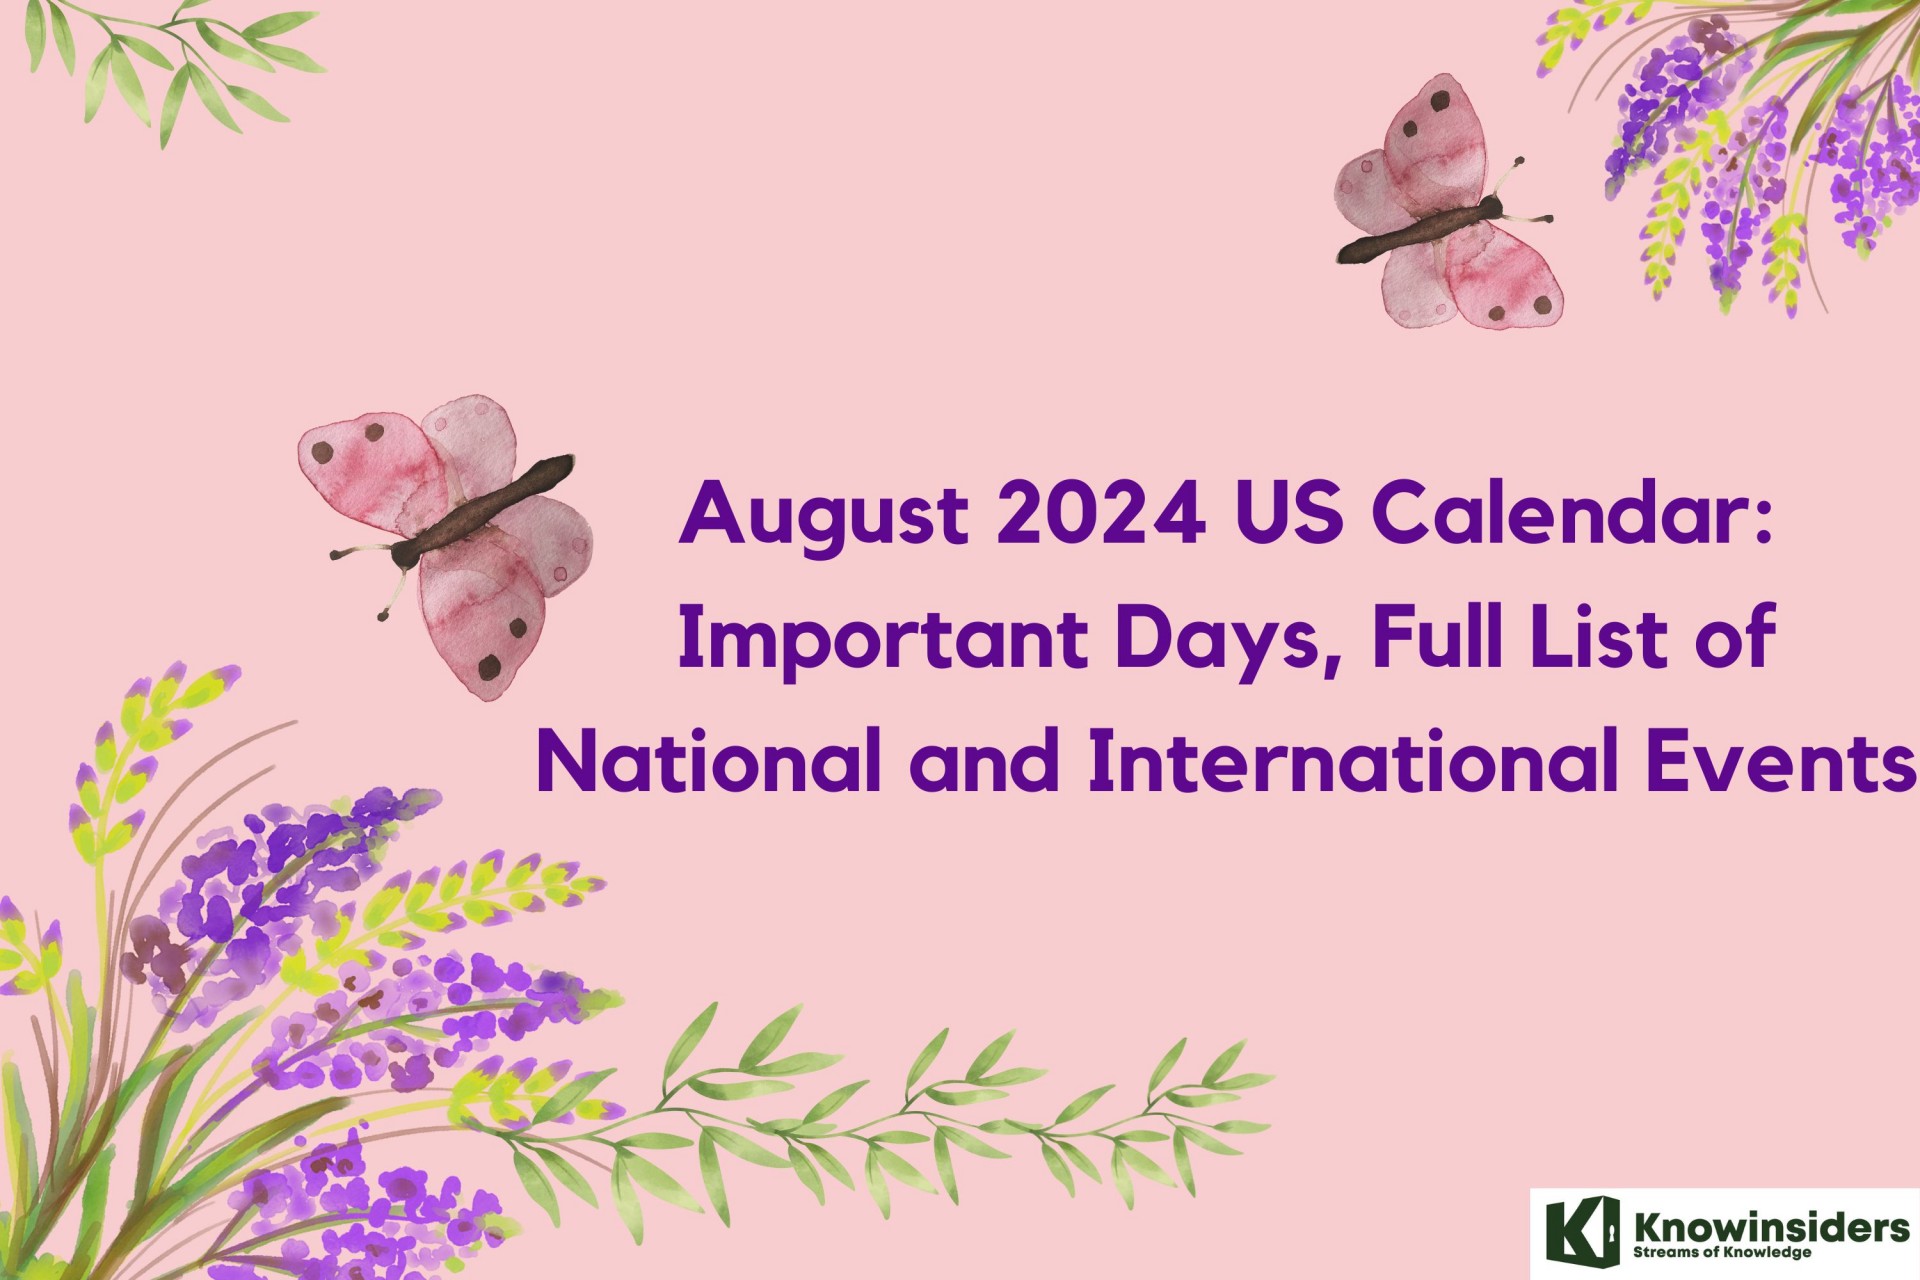 August 2024 US Calendar: Special Days, Full List of National and International Events